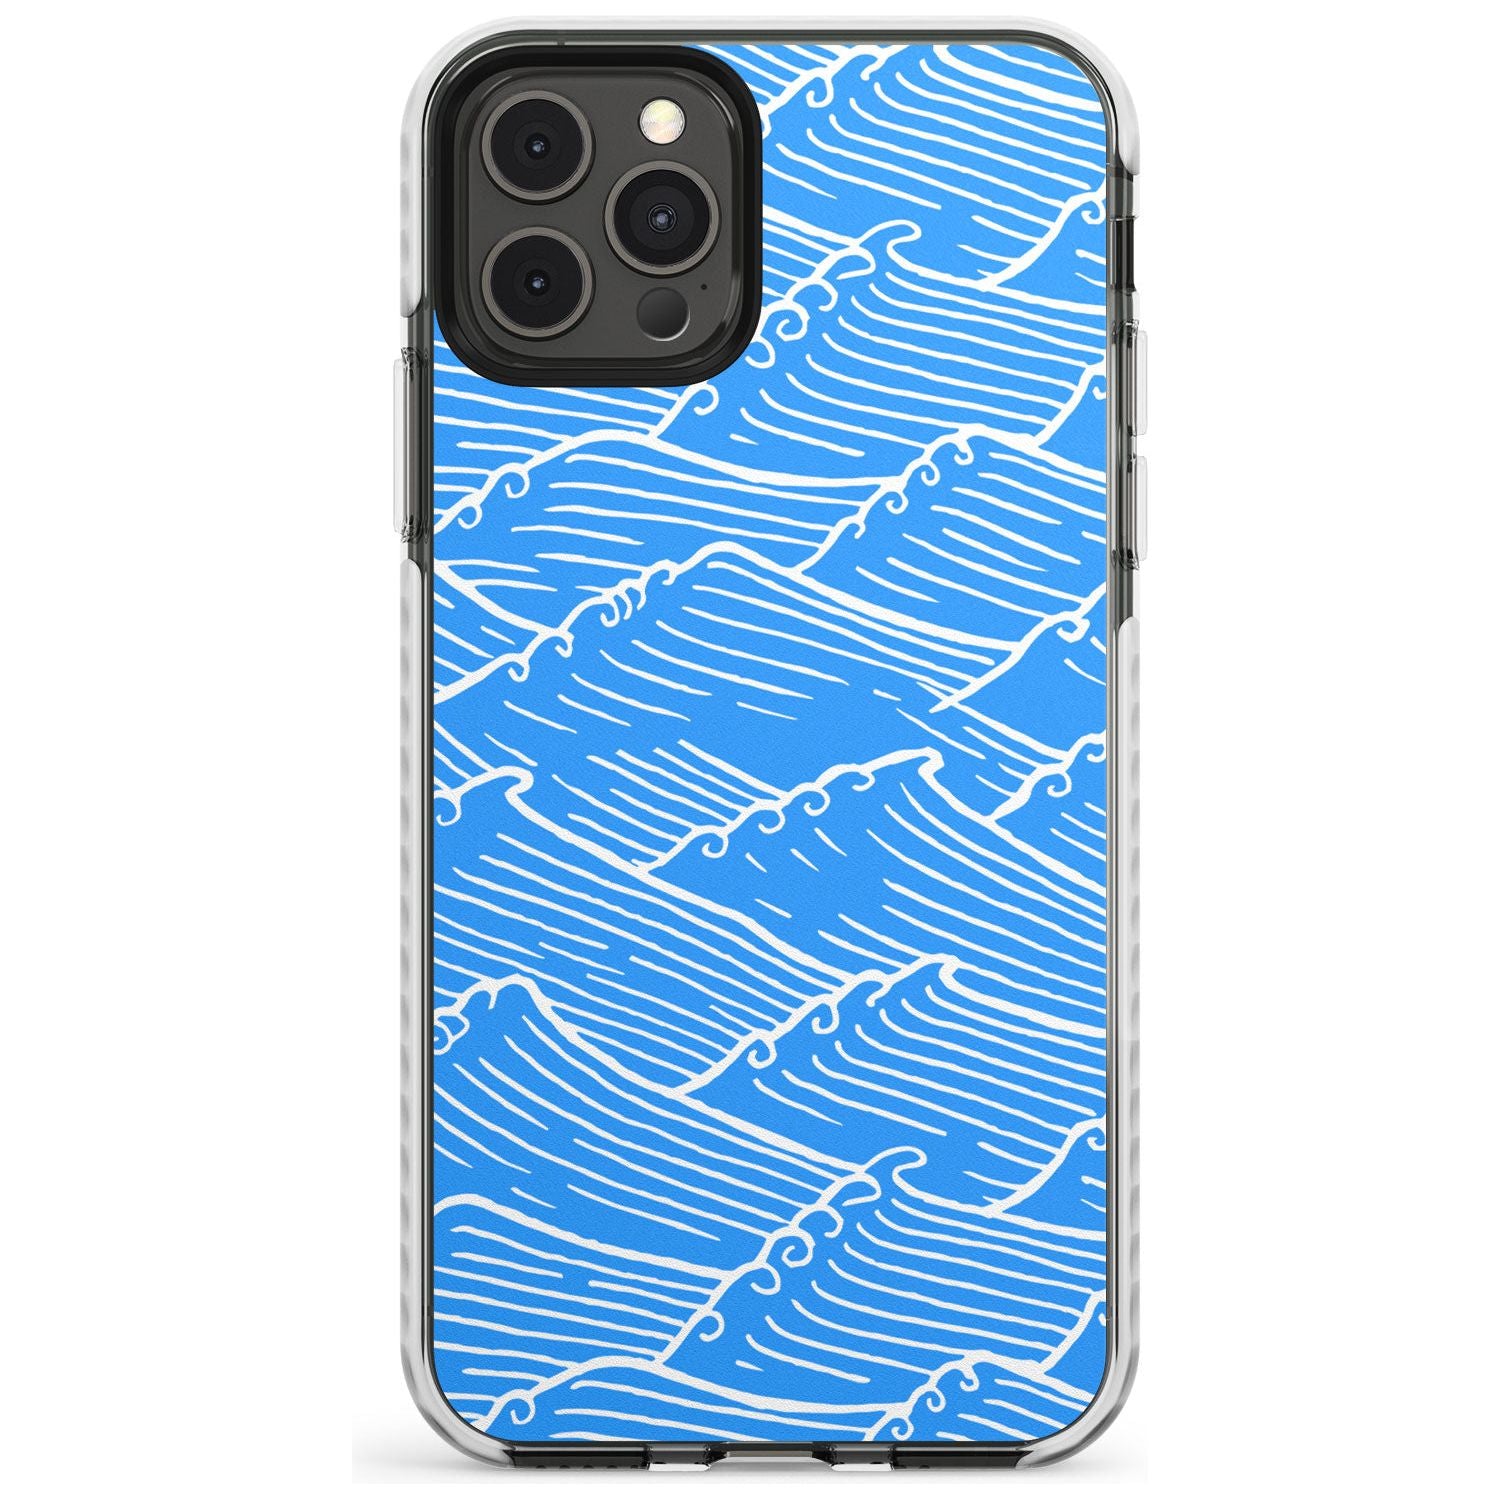 Waves Pattern Impact Phone Case for iPhone 11 Pro Max